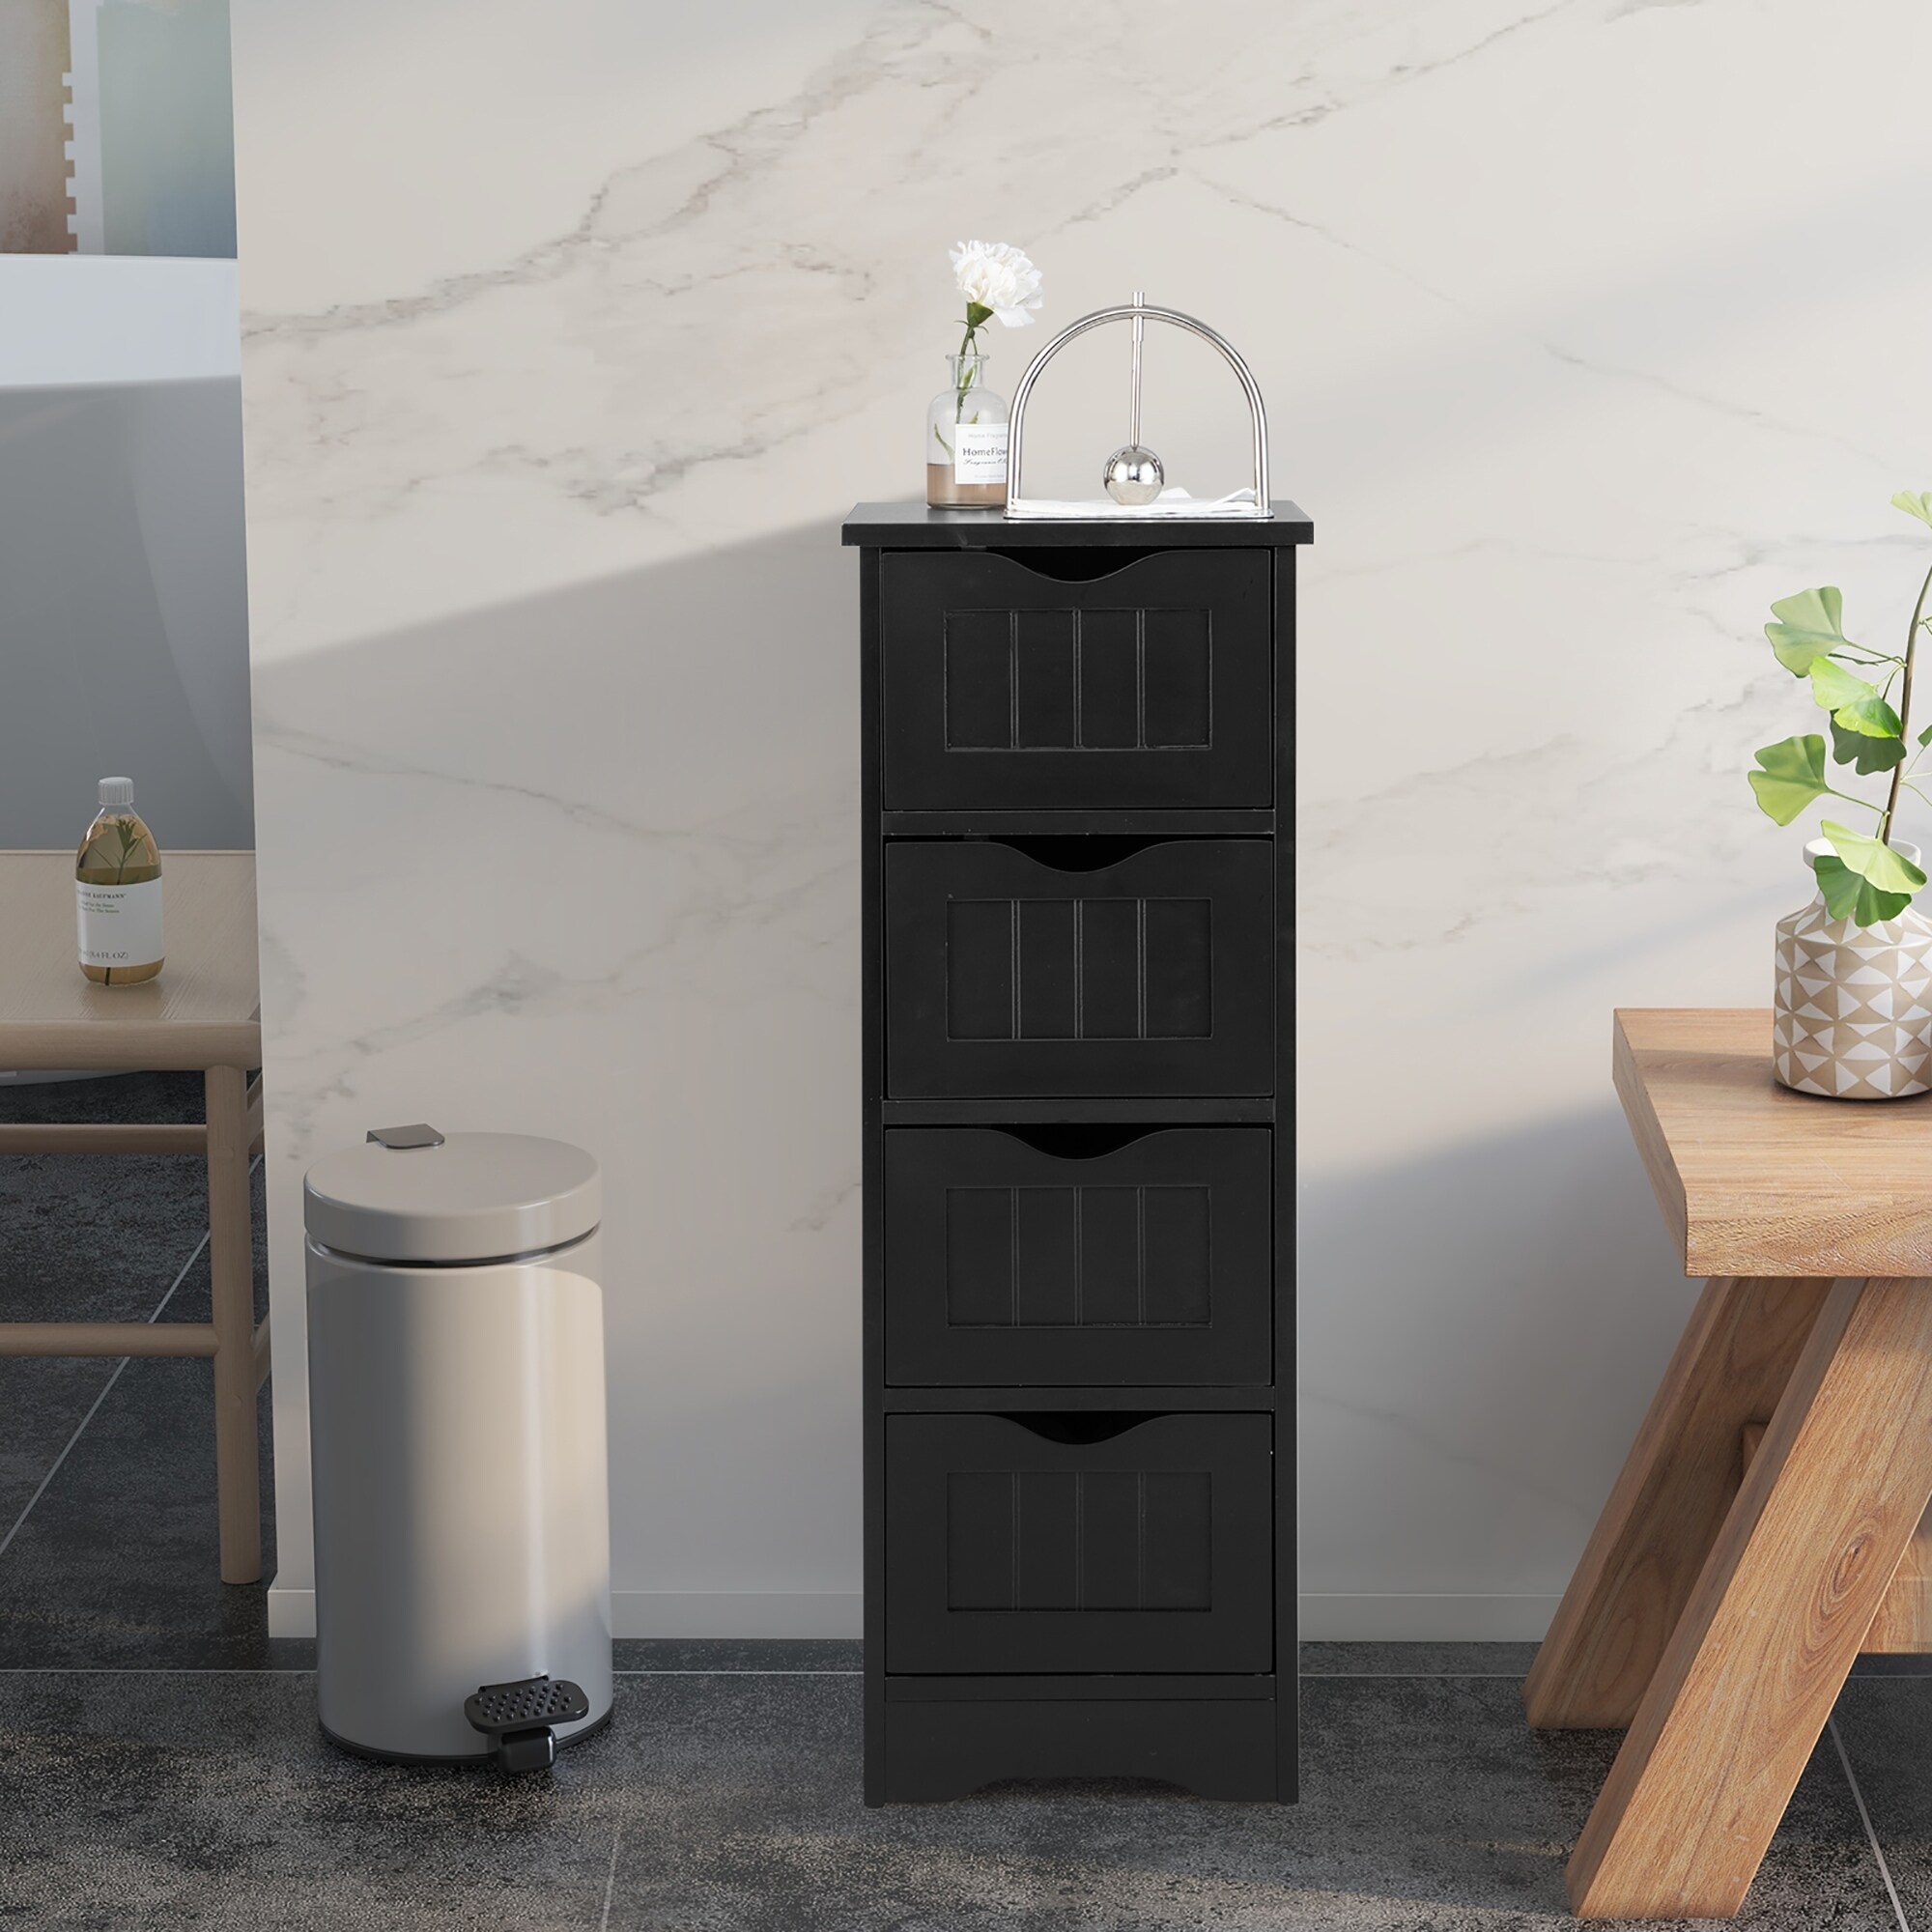 https://ak1.ostkcdn.com/images/products/is/images/direct/a80ab140310d6145109babfaaa454796403a6dba/Gymax-Bathroom-Floor-Cabinet-Free-Standing-Storage-Side-Organizer-W-4.jpg